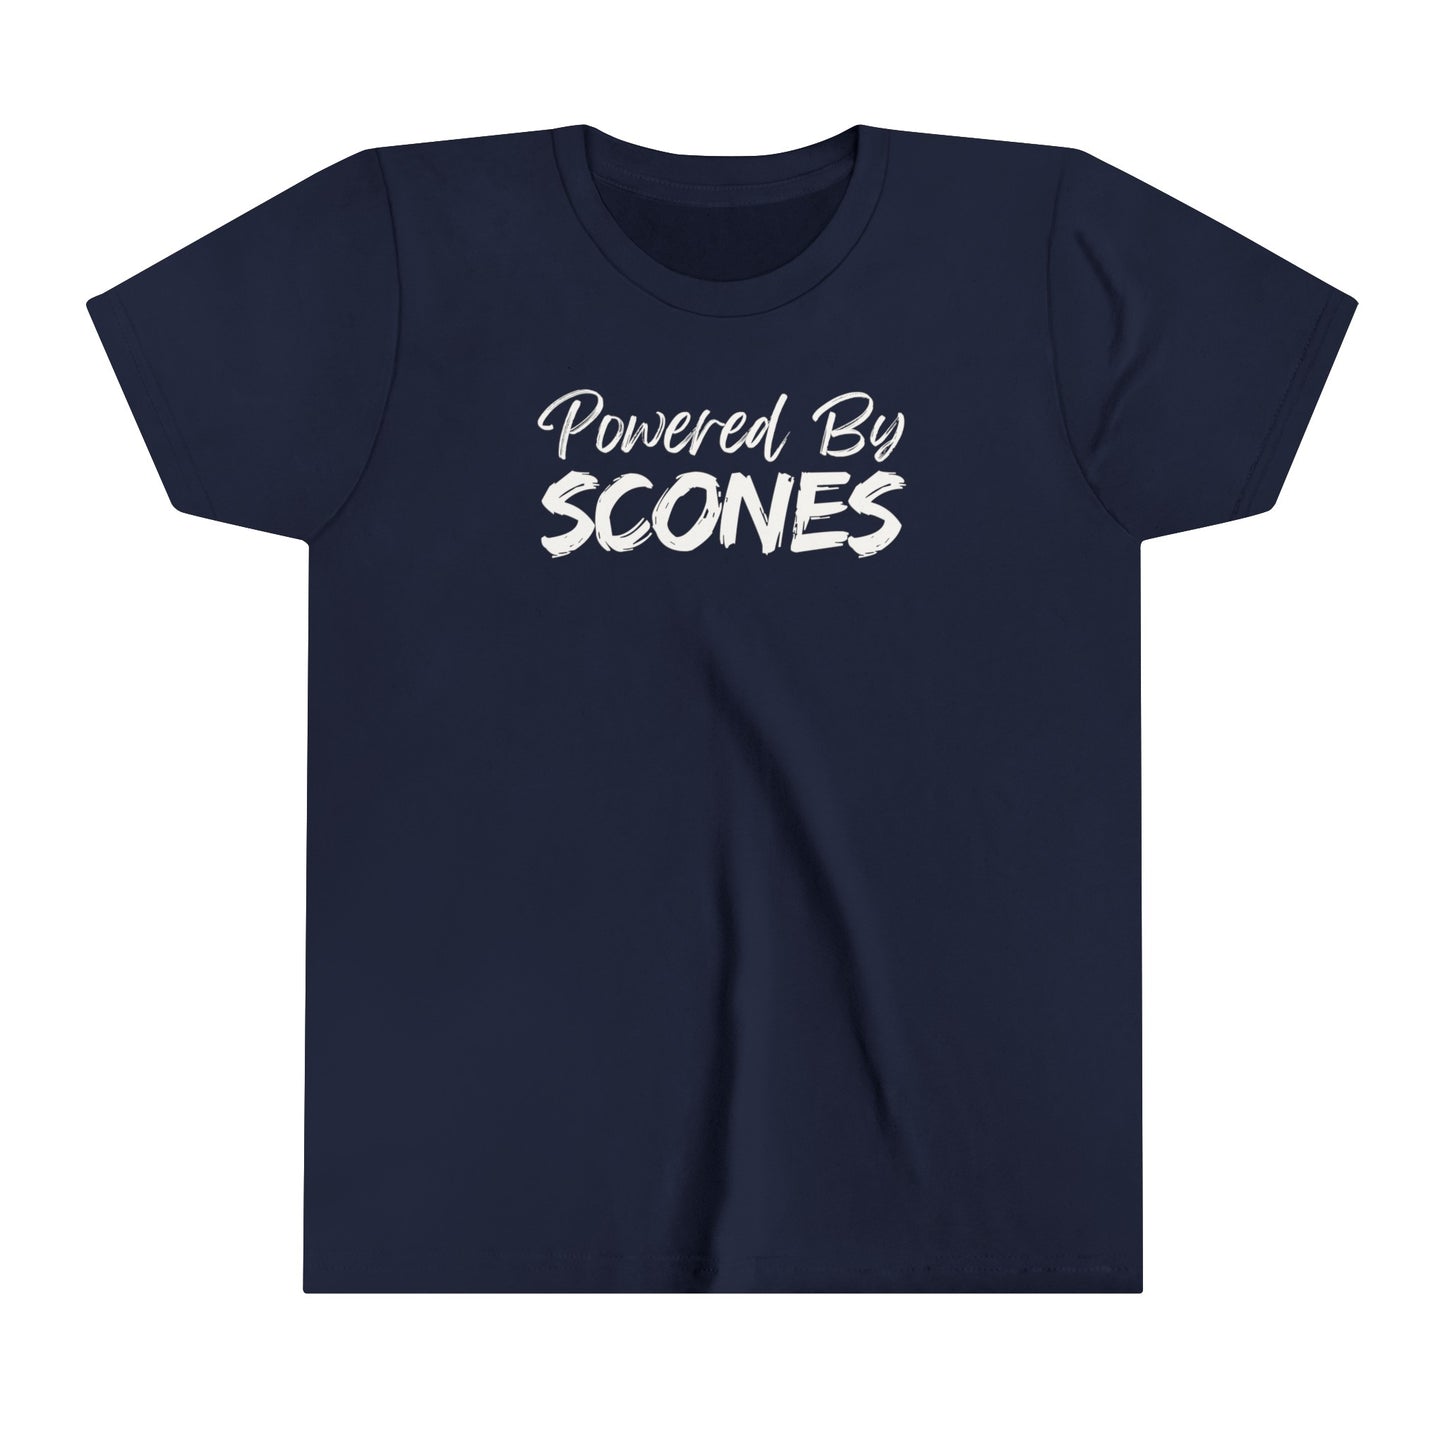 Powered by Scones Kids' T-Shirt